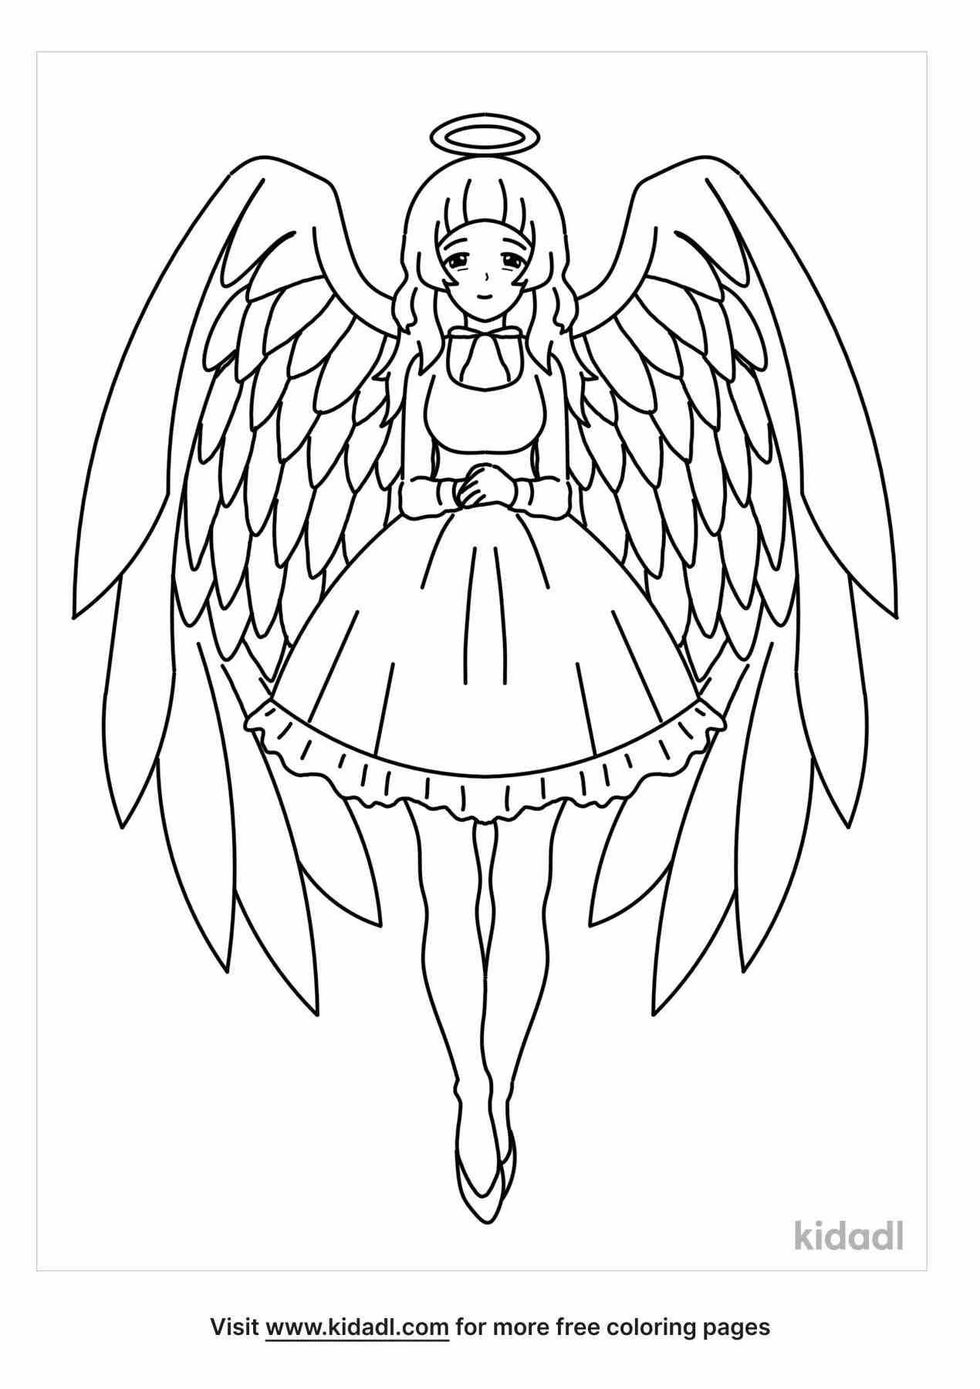 coloring page containing anime angel